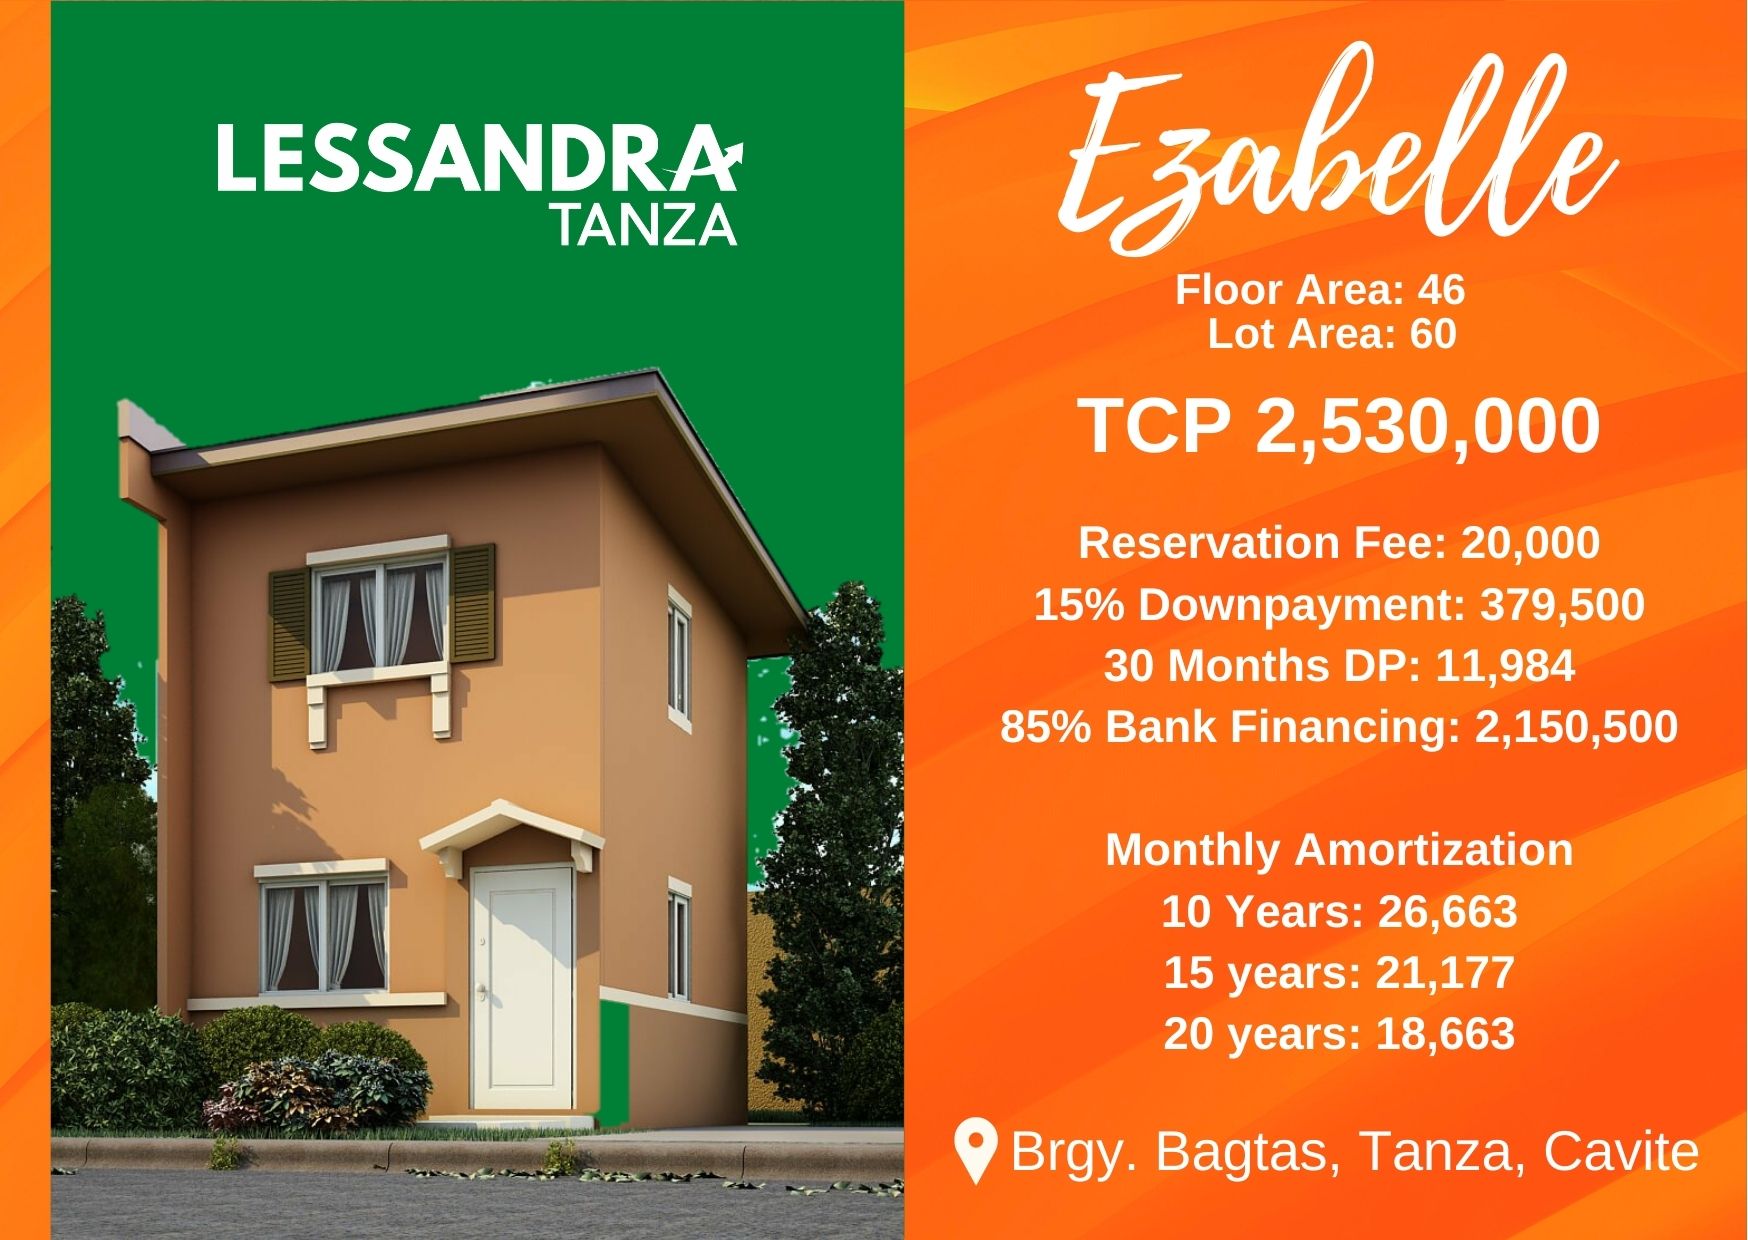 House and Lot in Tanza, Cavite Ezabelle